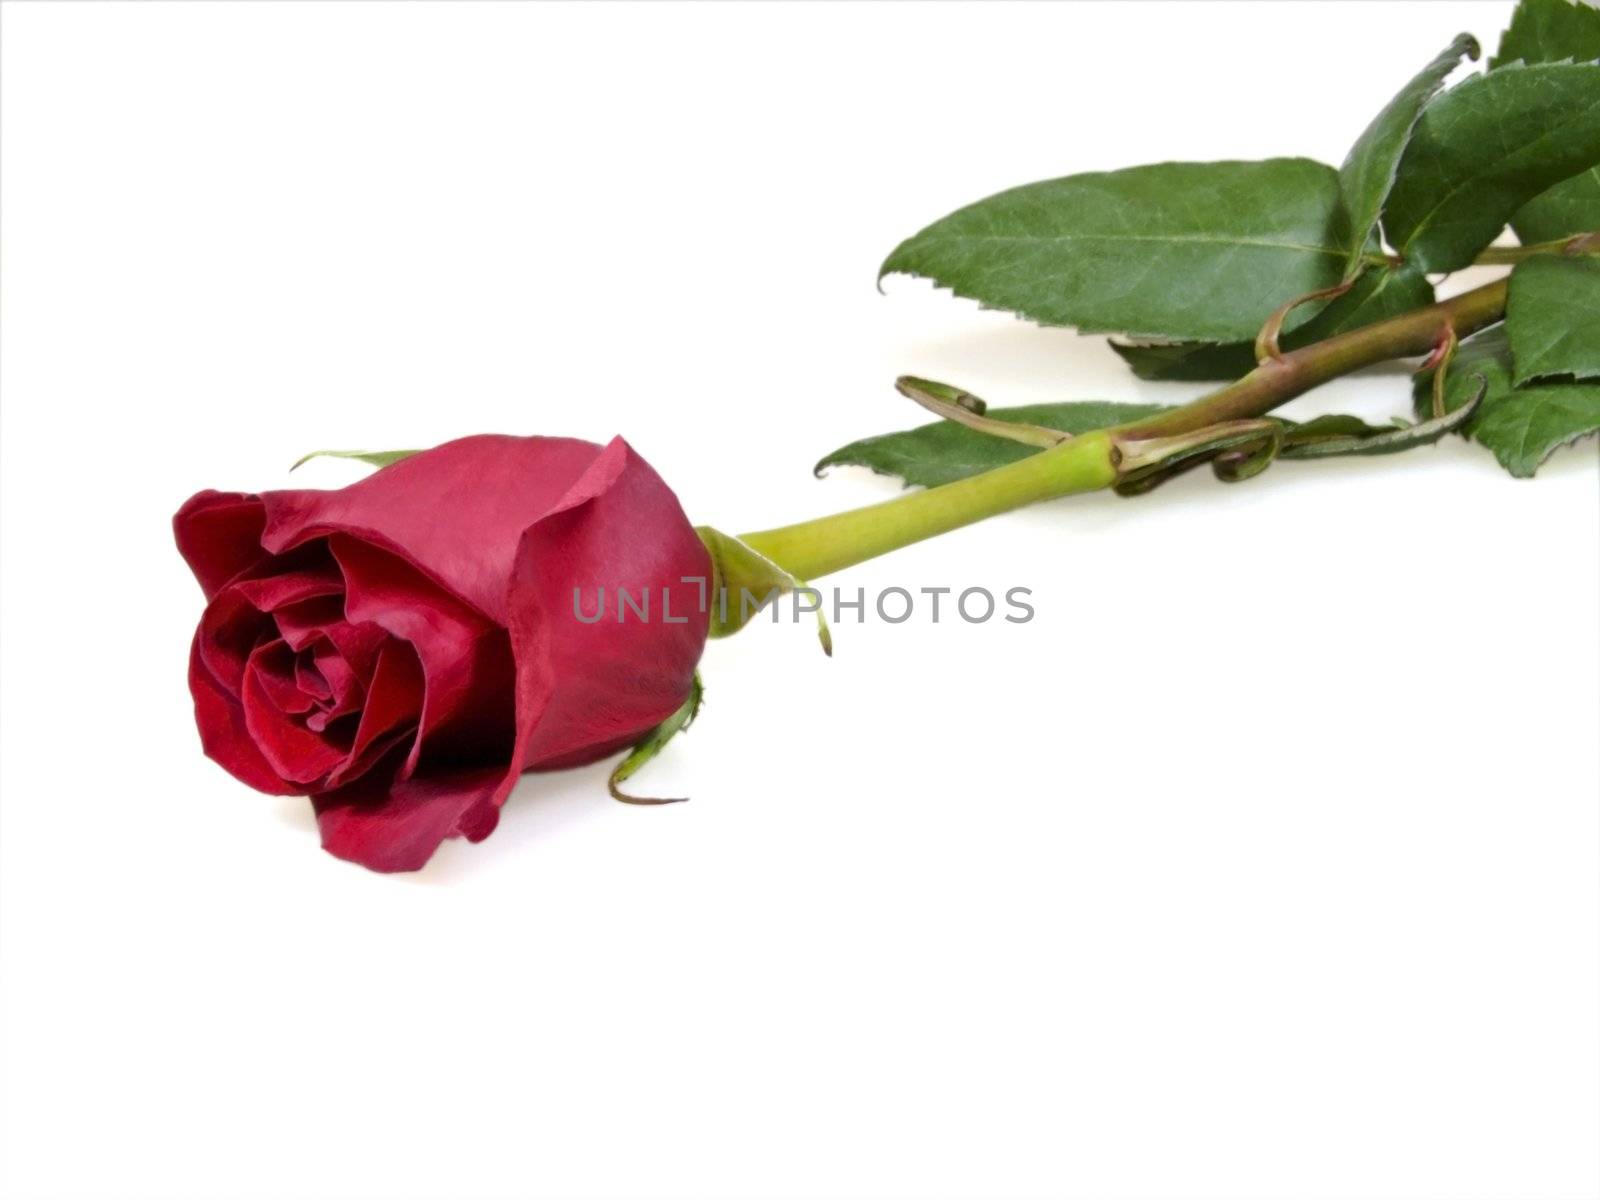 Lying red rose with leaves - isolated on white background